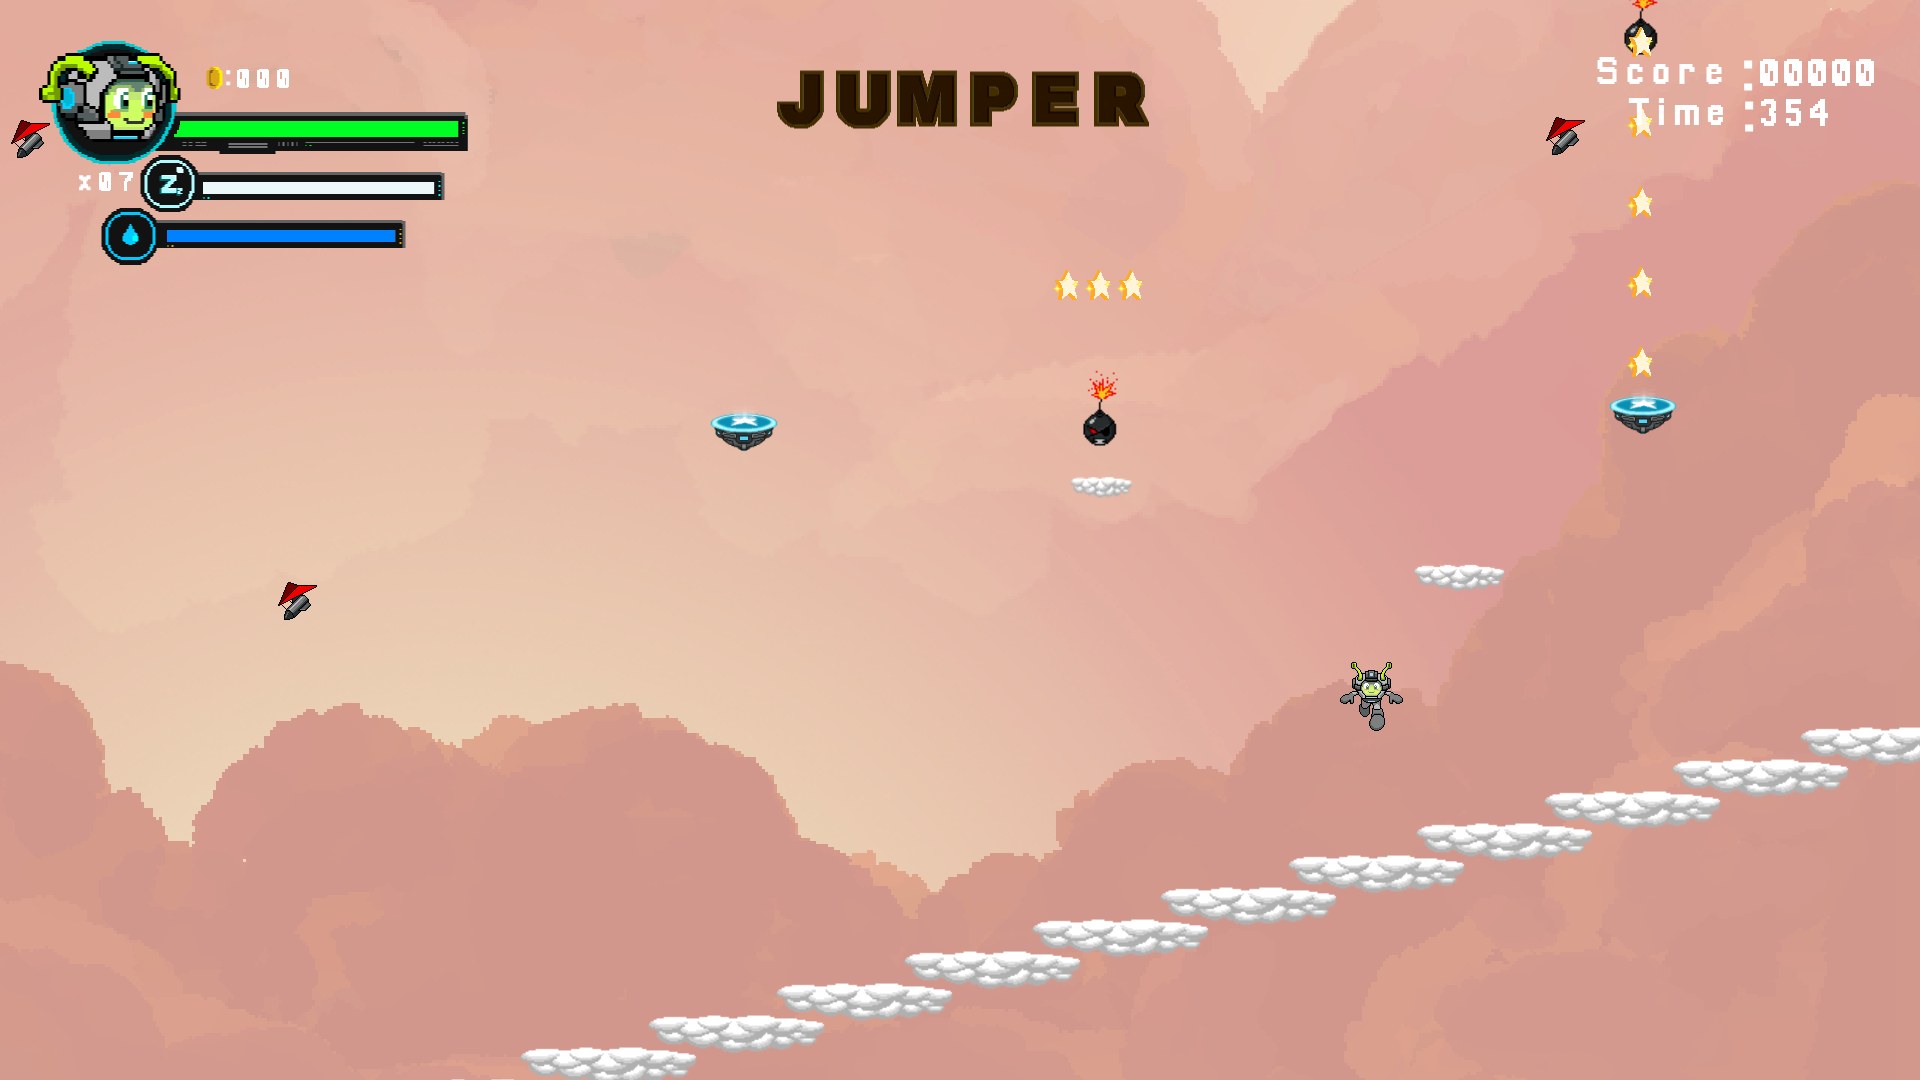 Jumper Starman Scape From the Blue Planet Screenshot 2